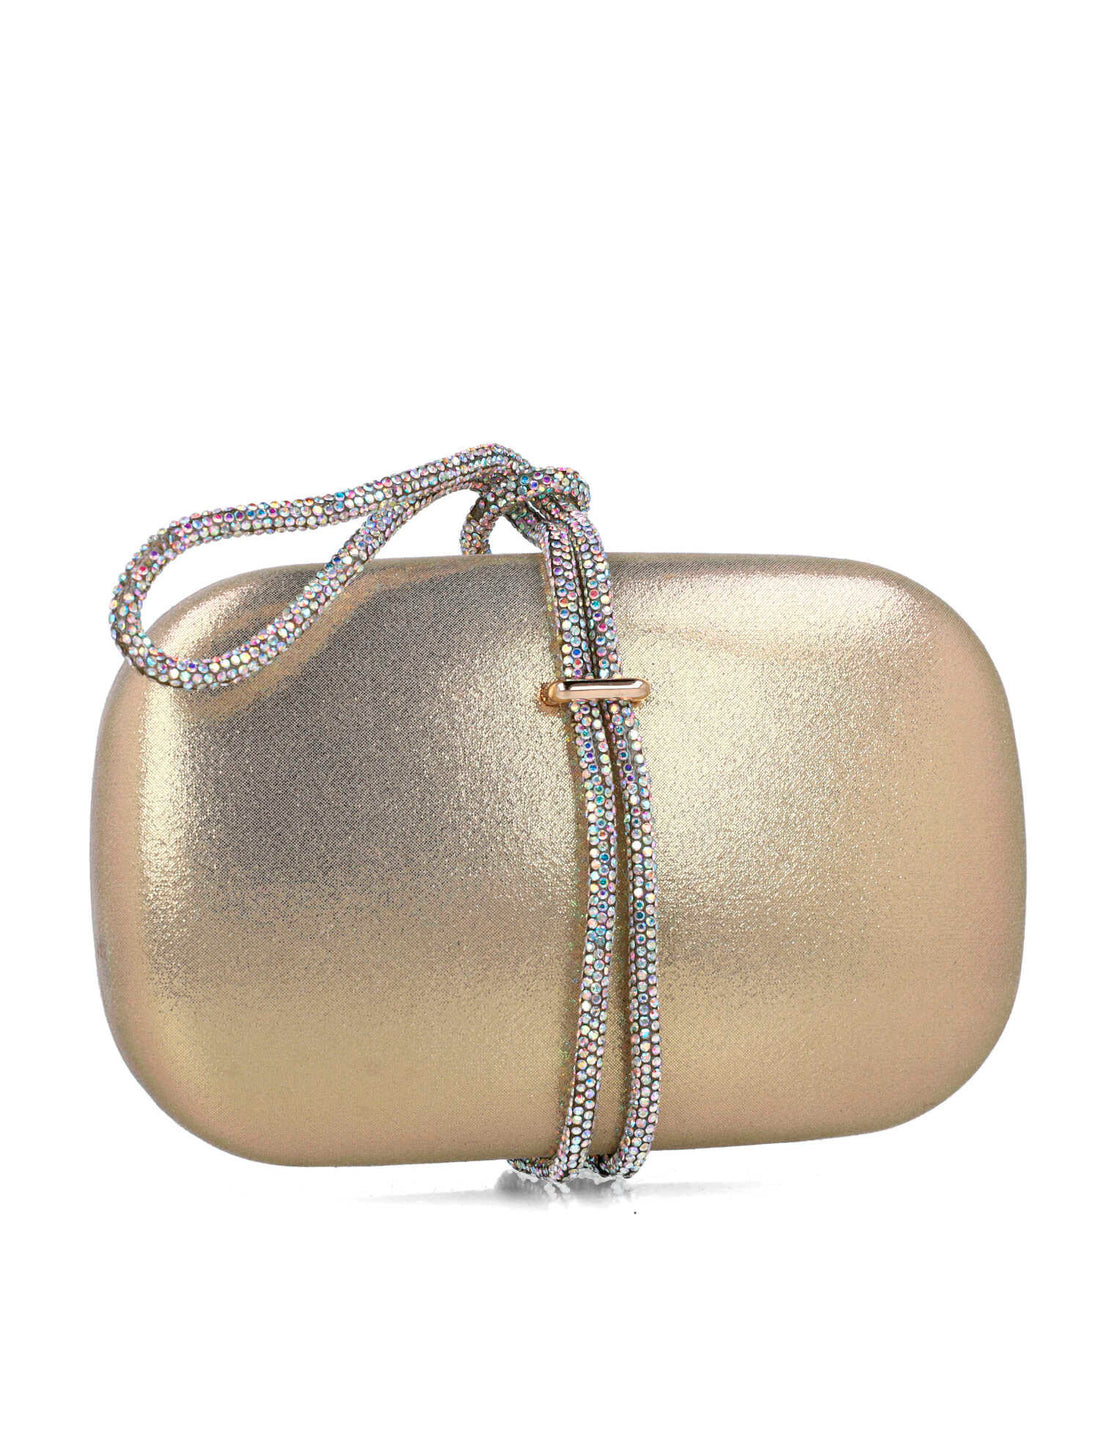 Gold Clutch With Embellished Hand Strap_85499_00_02